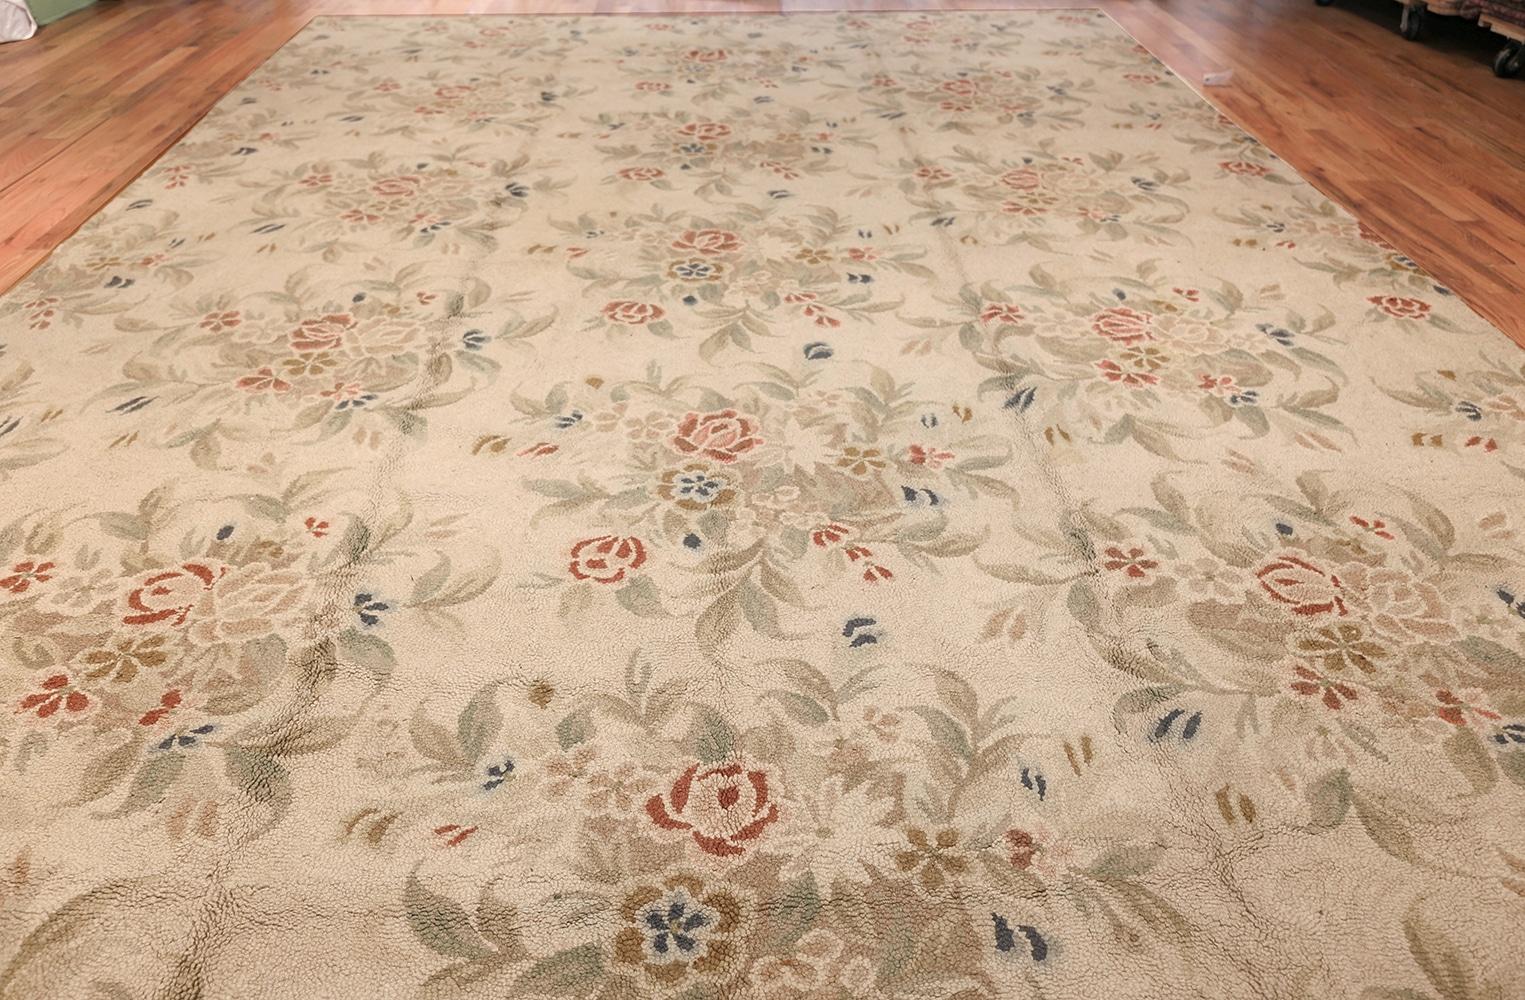 Beautiful large Size Floral American American Rug, Country of origin: United States of America, Circa: Turn of the Twentieth Century – A style that is as intriguing as it is unique, Hooked rugs and carpets represent a singular development in the